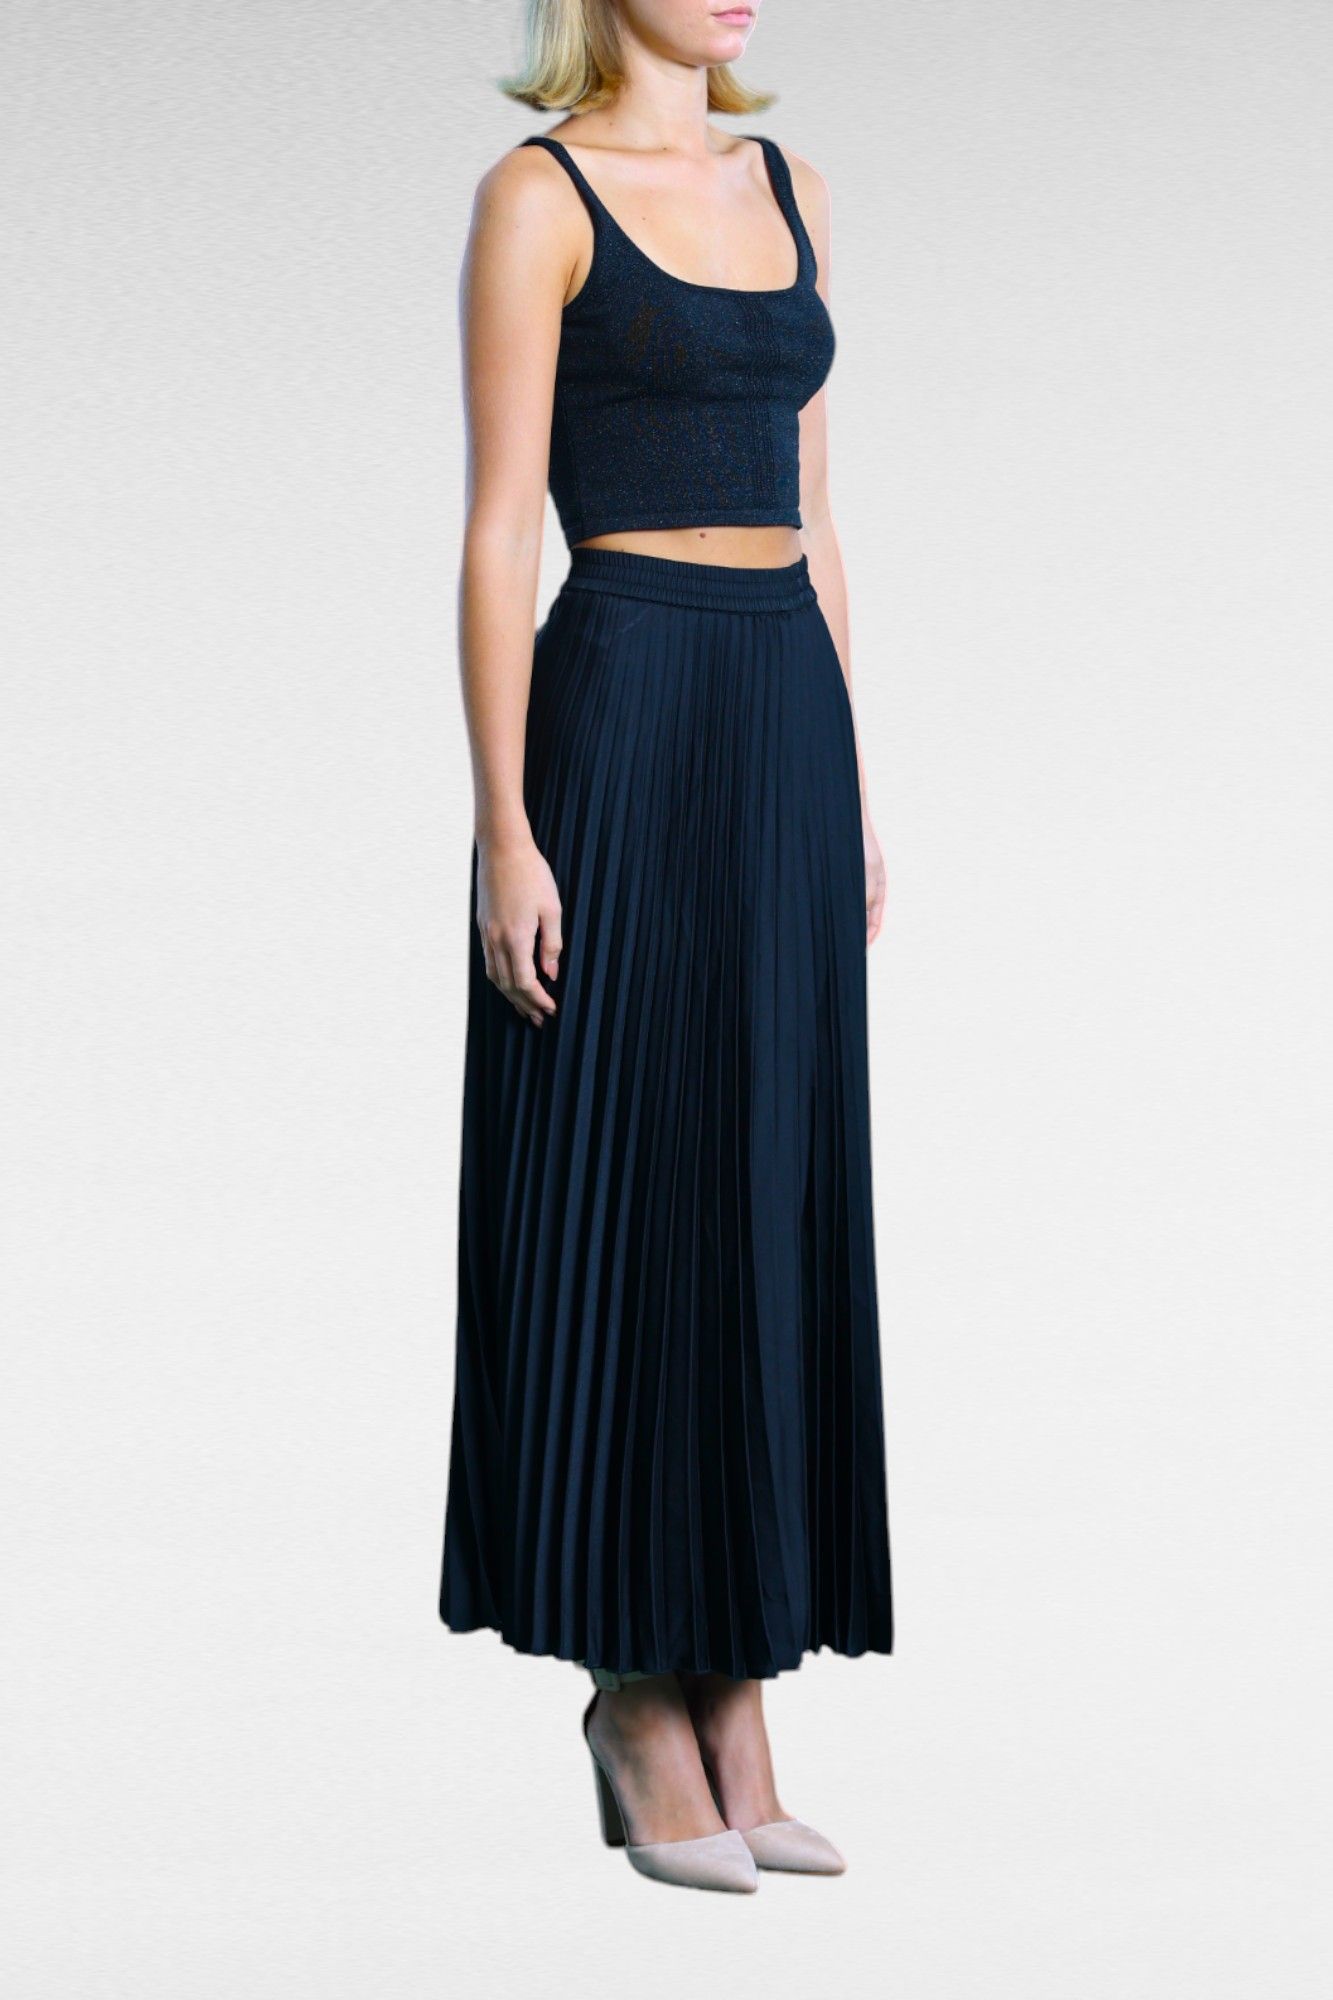 Brave and True Alias Pleated Skirt in Black